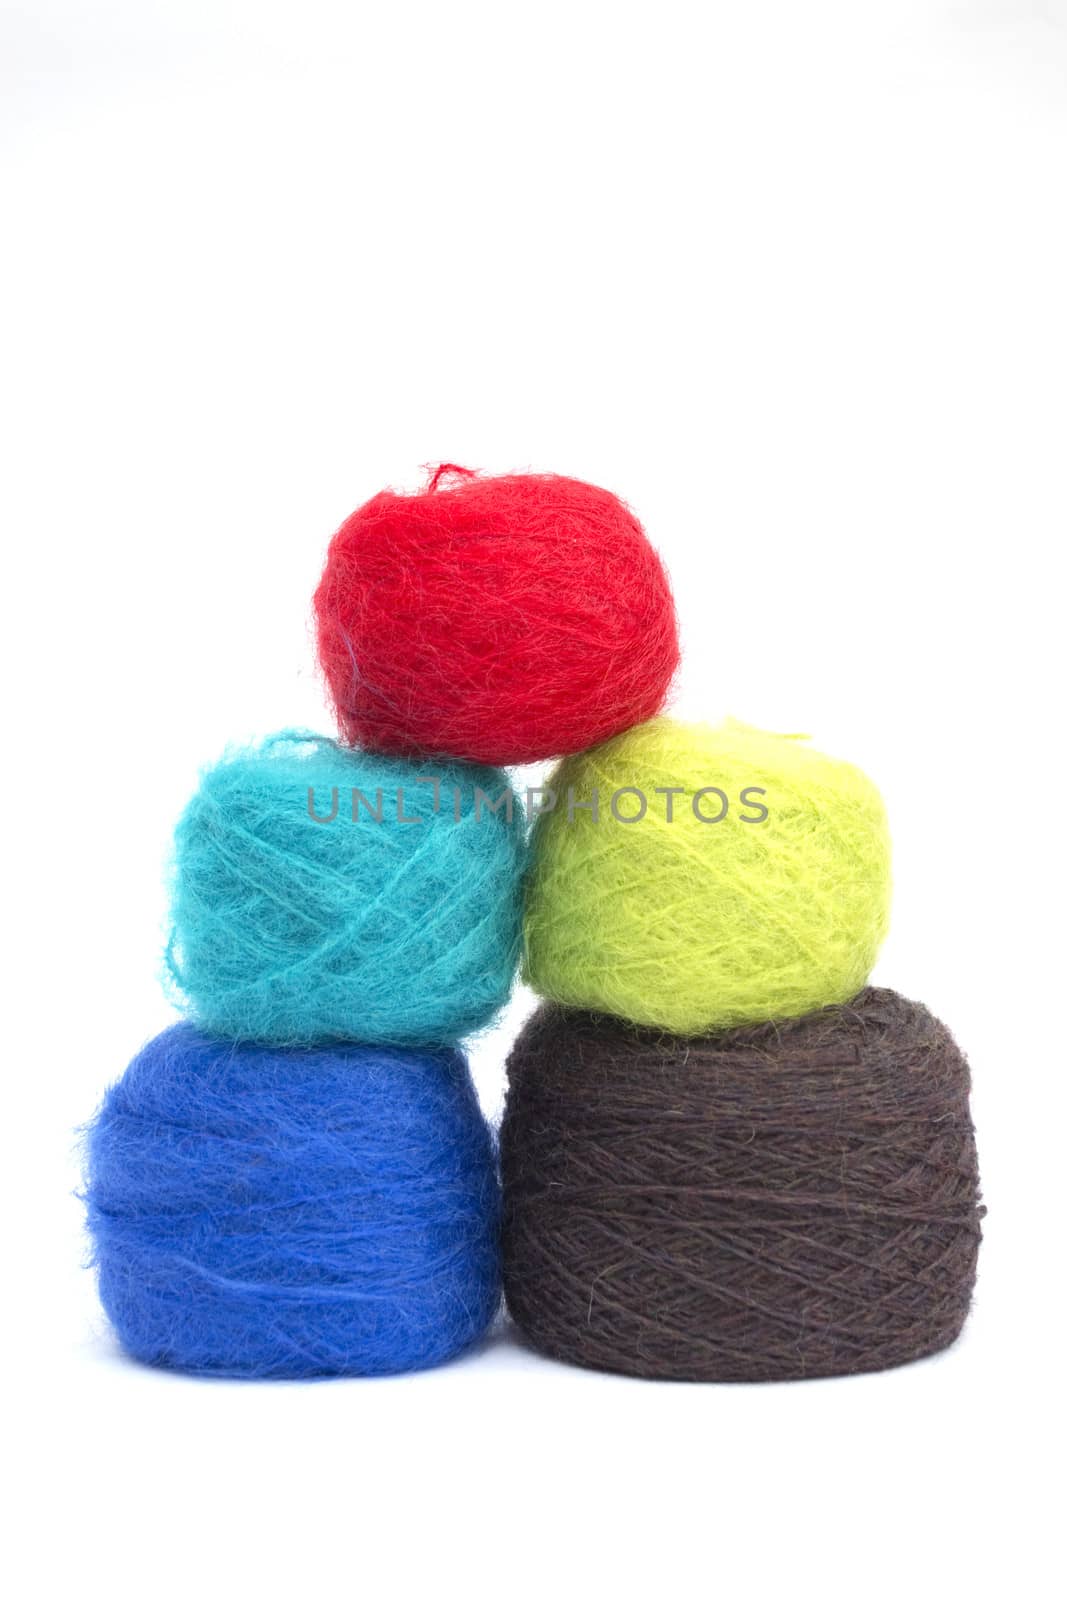 Various balls of coloured wools on a white background